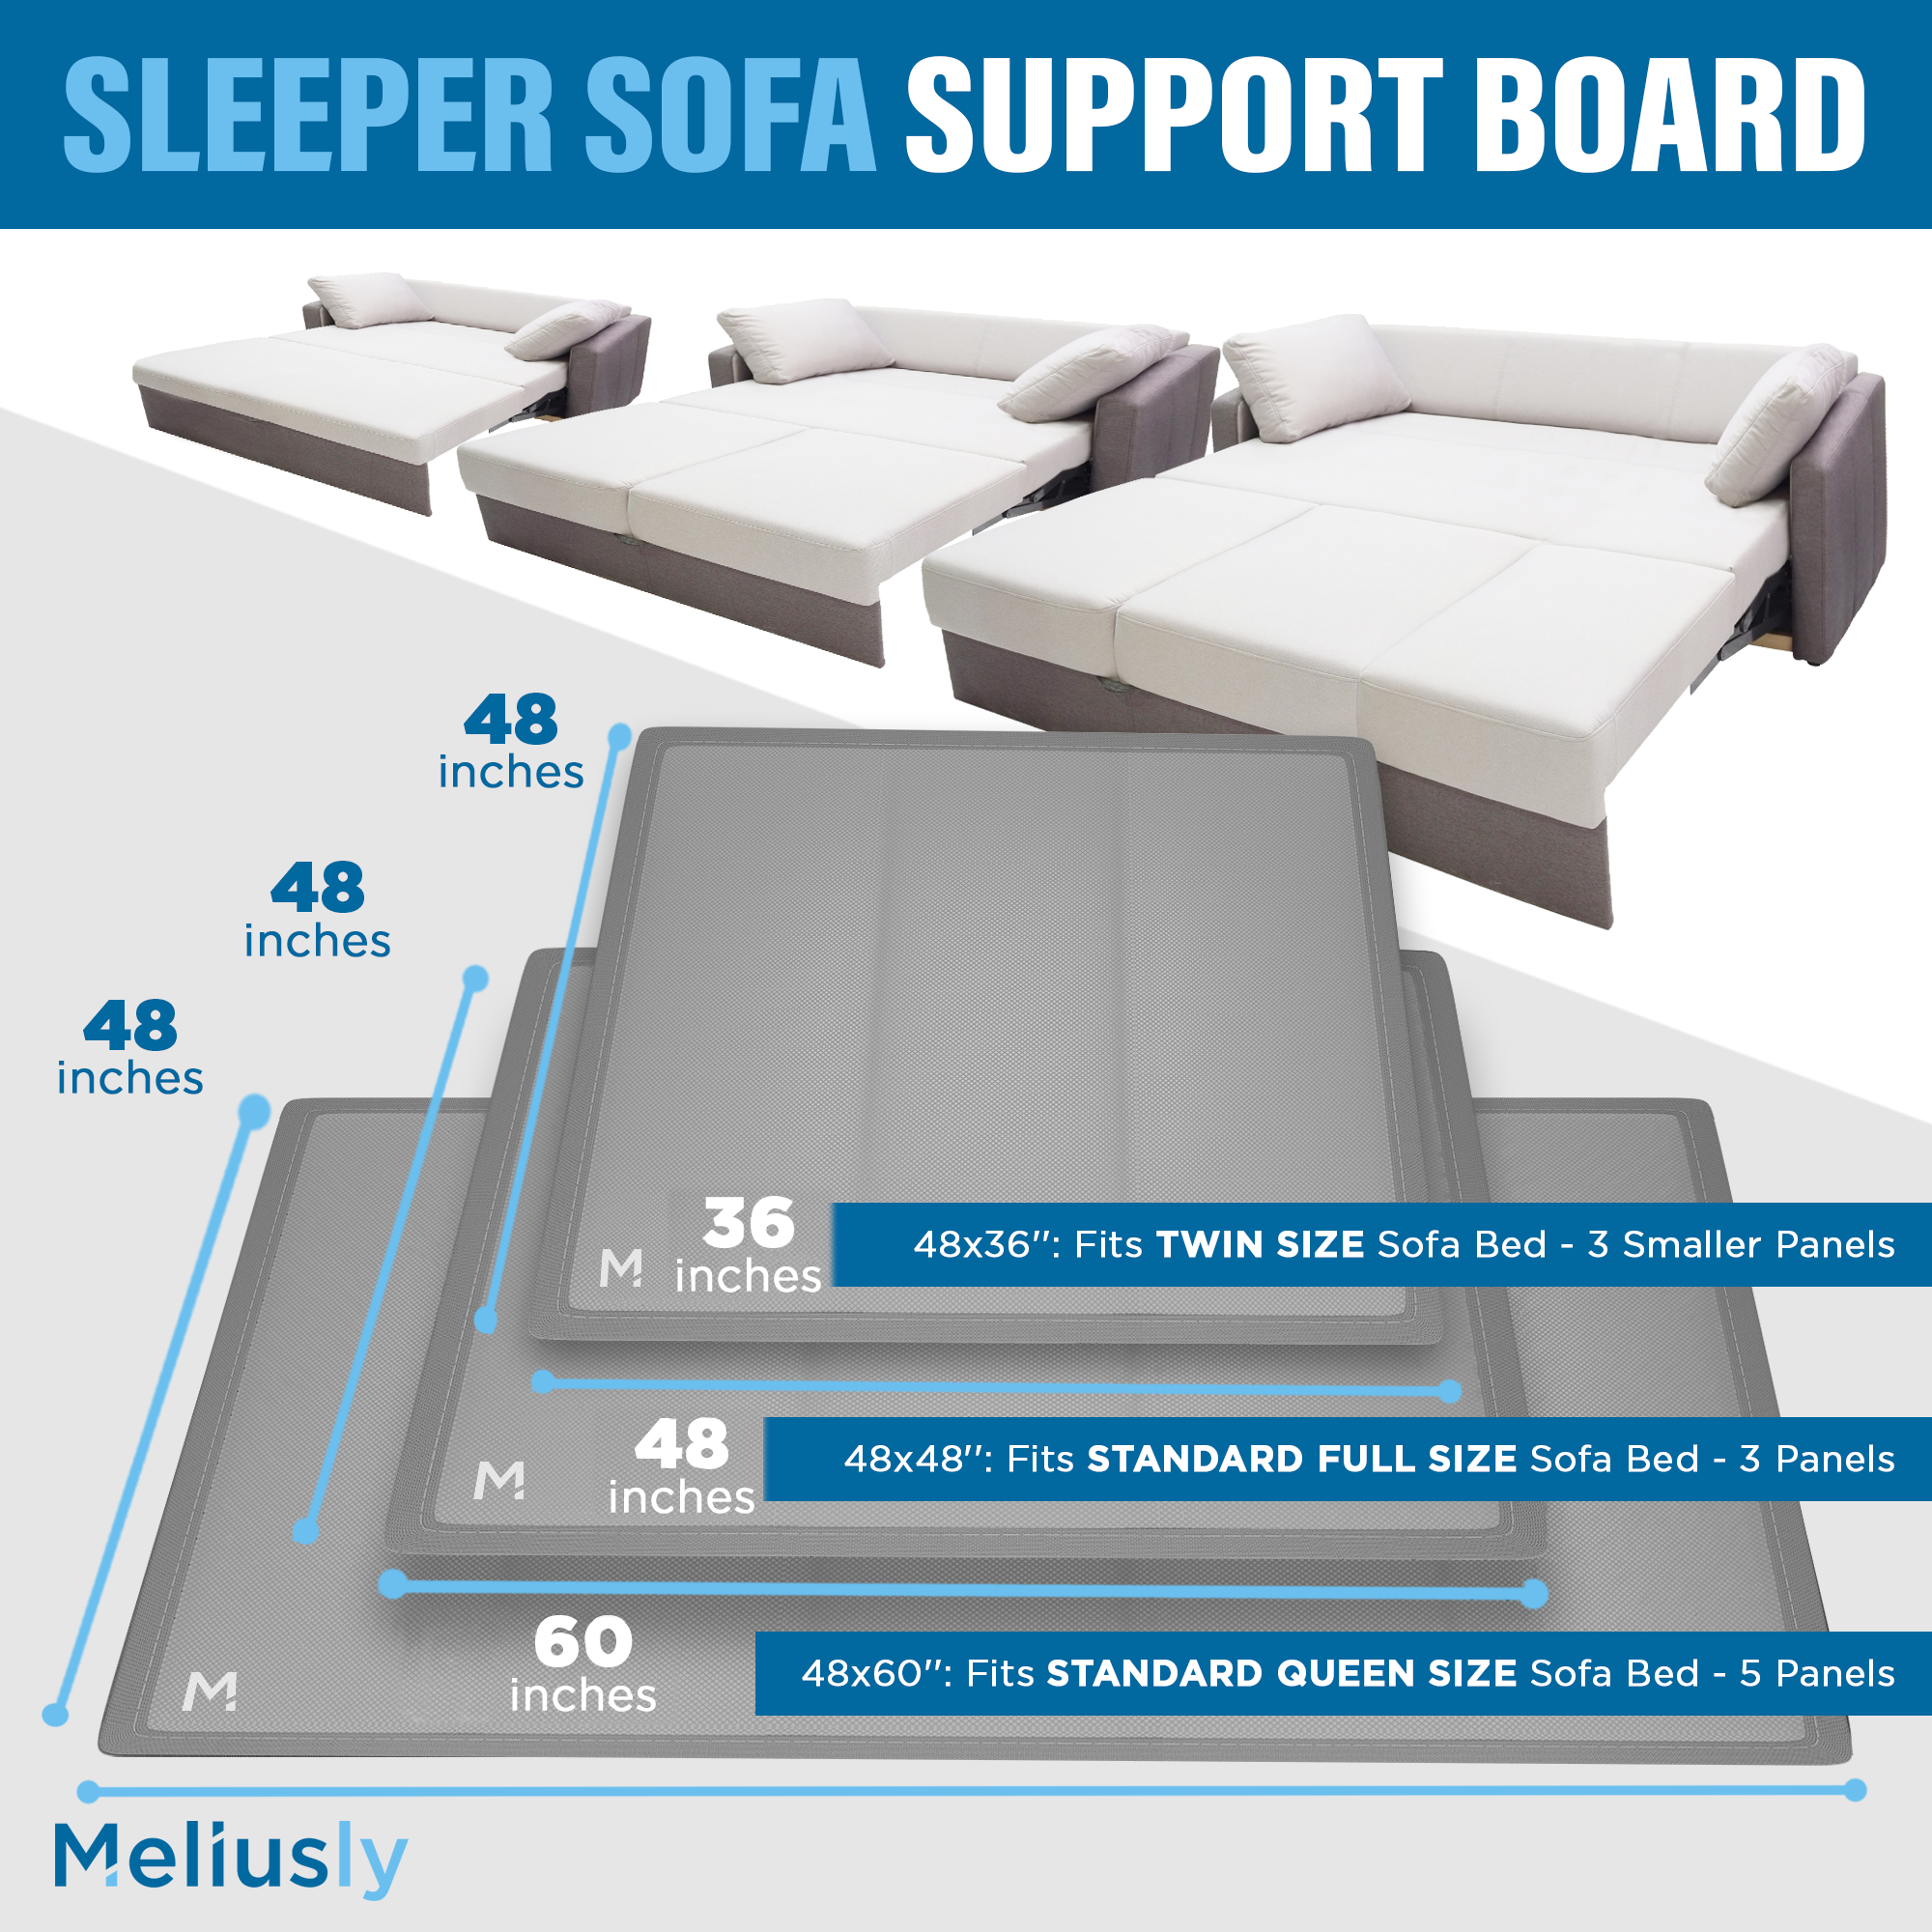 Meliusly® Sofa Cushion Support Board (17x79) - Couch Supports for